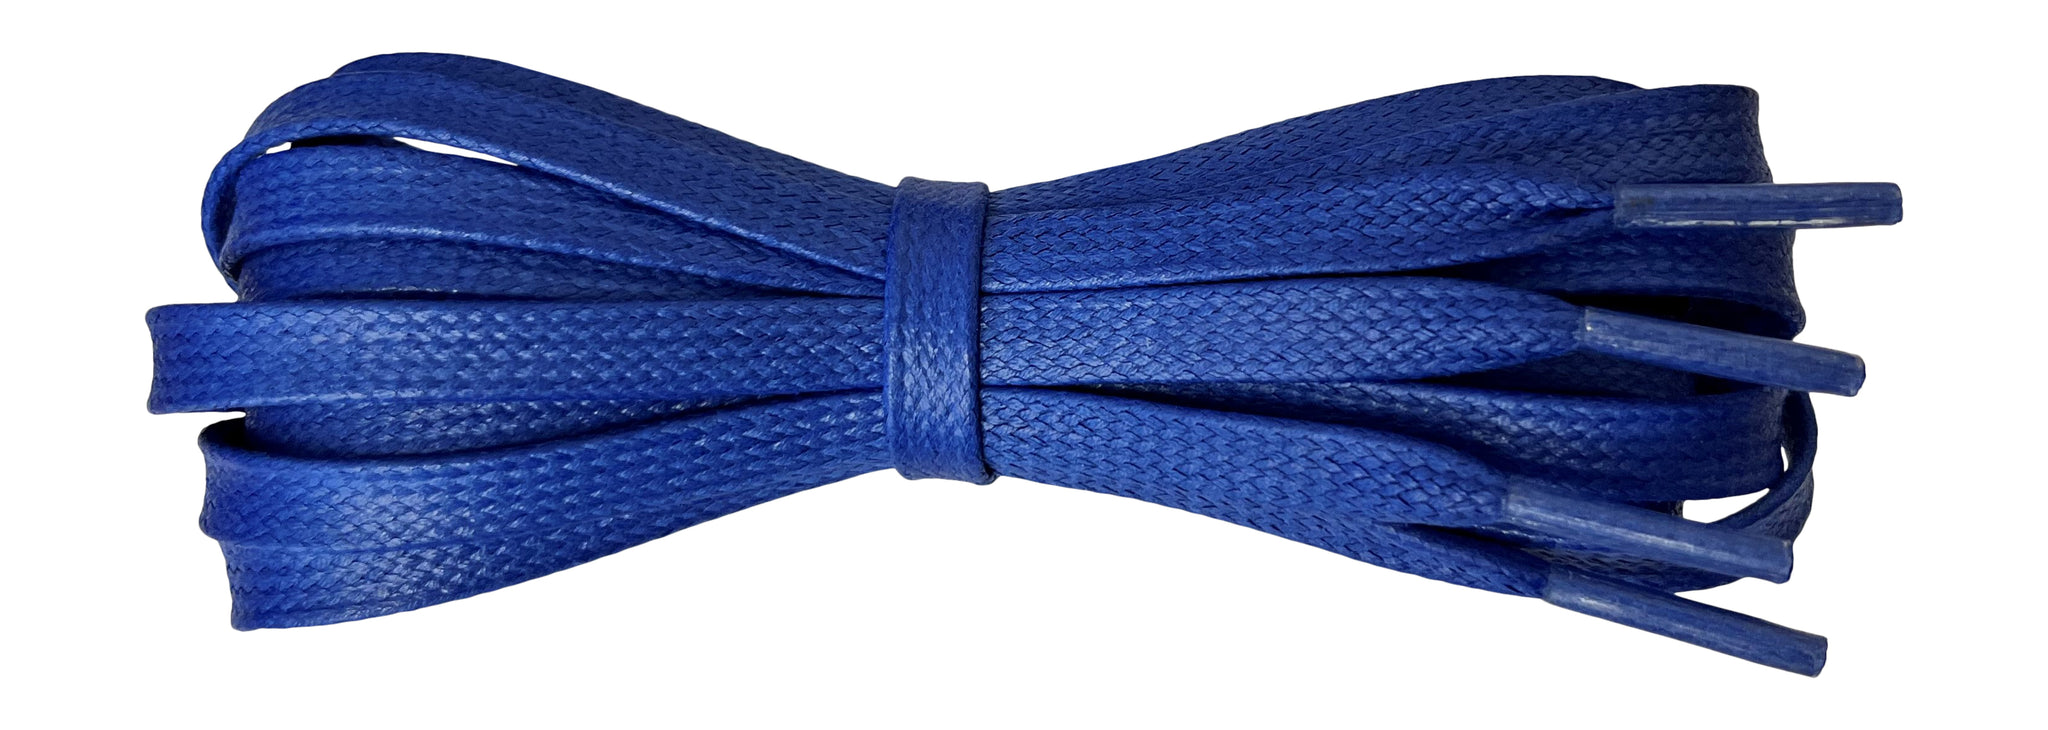 8 mm Flat Royal Blue waxed cotton boot laces - fabmania shoe laces